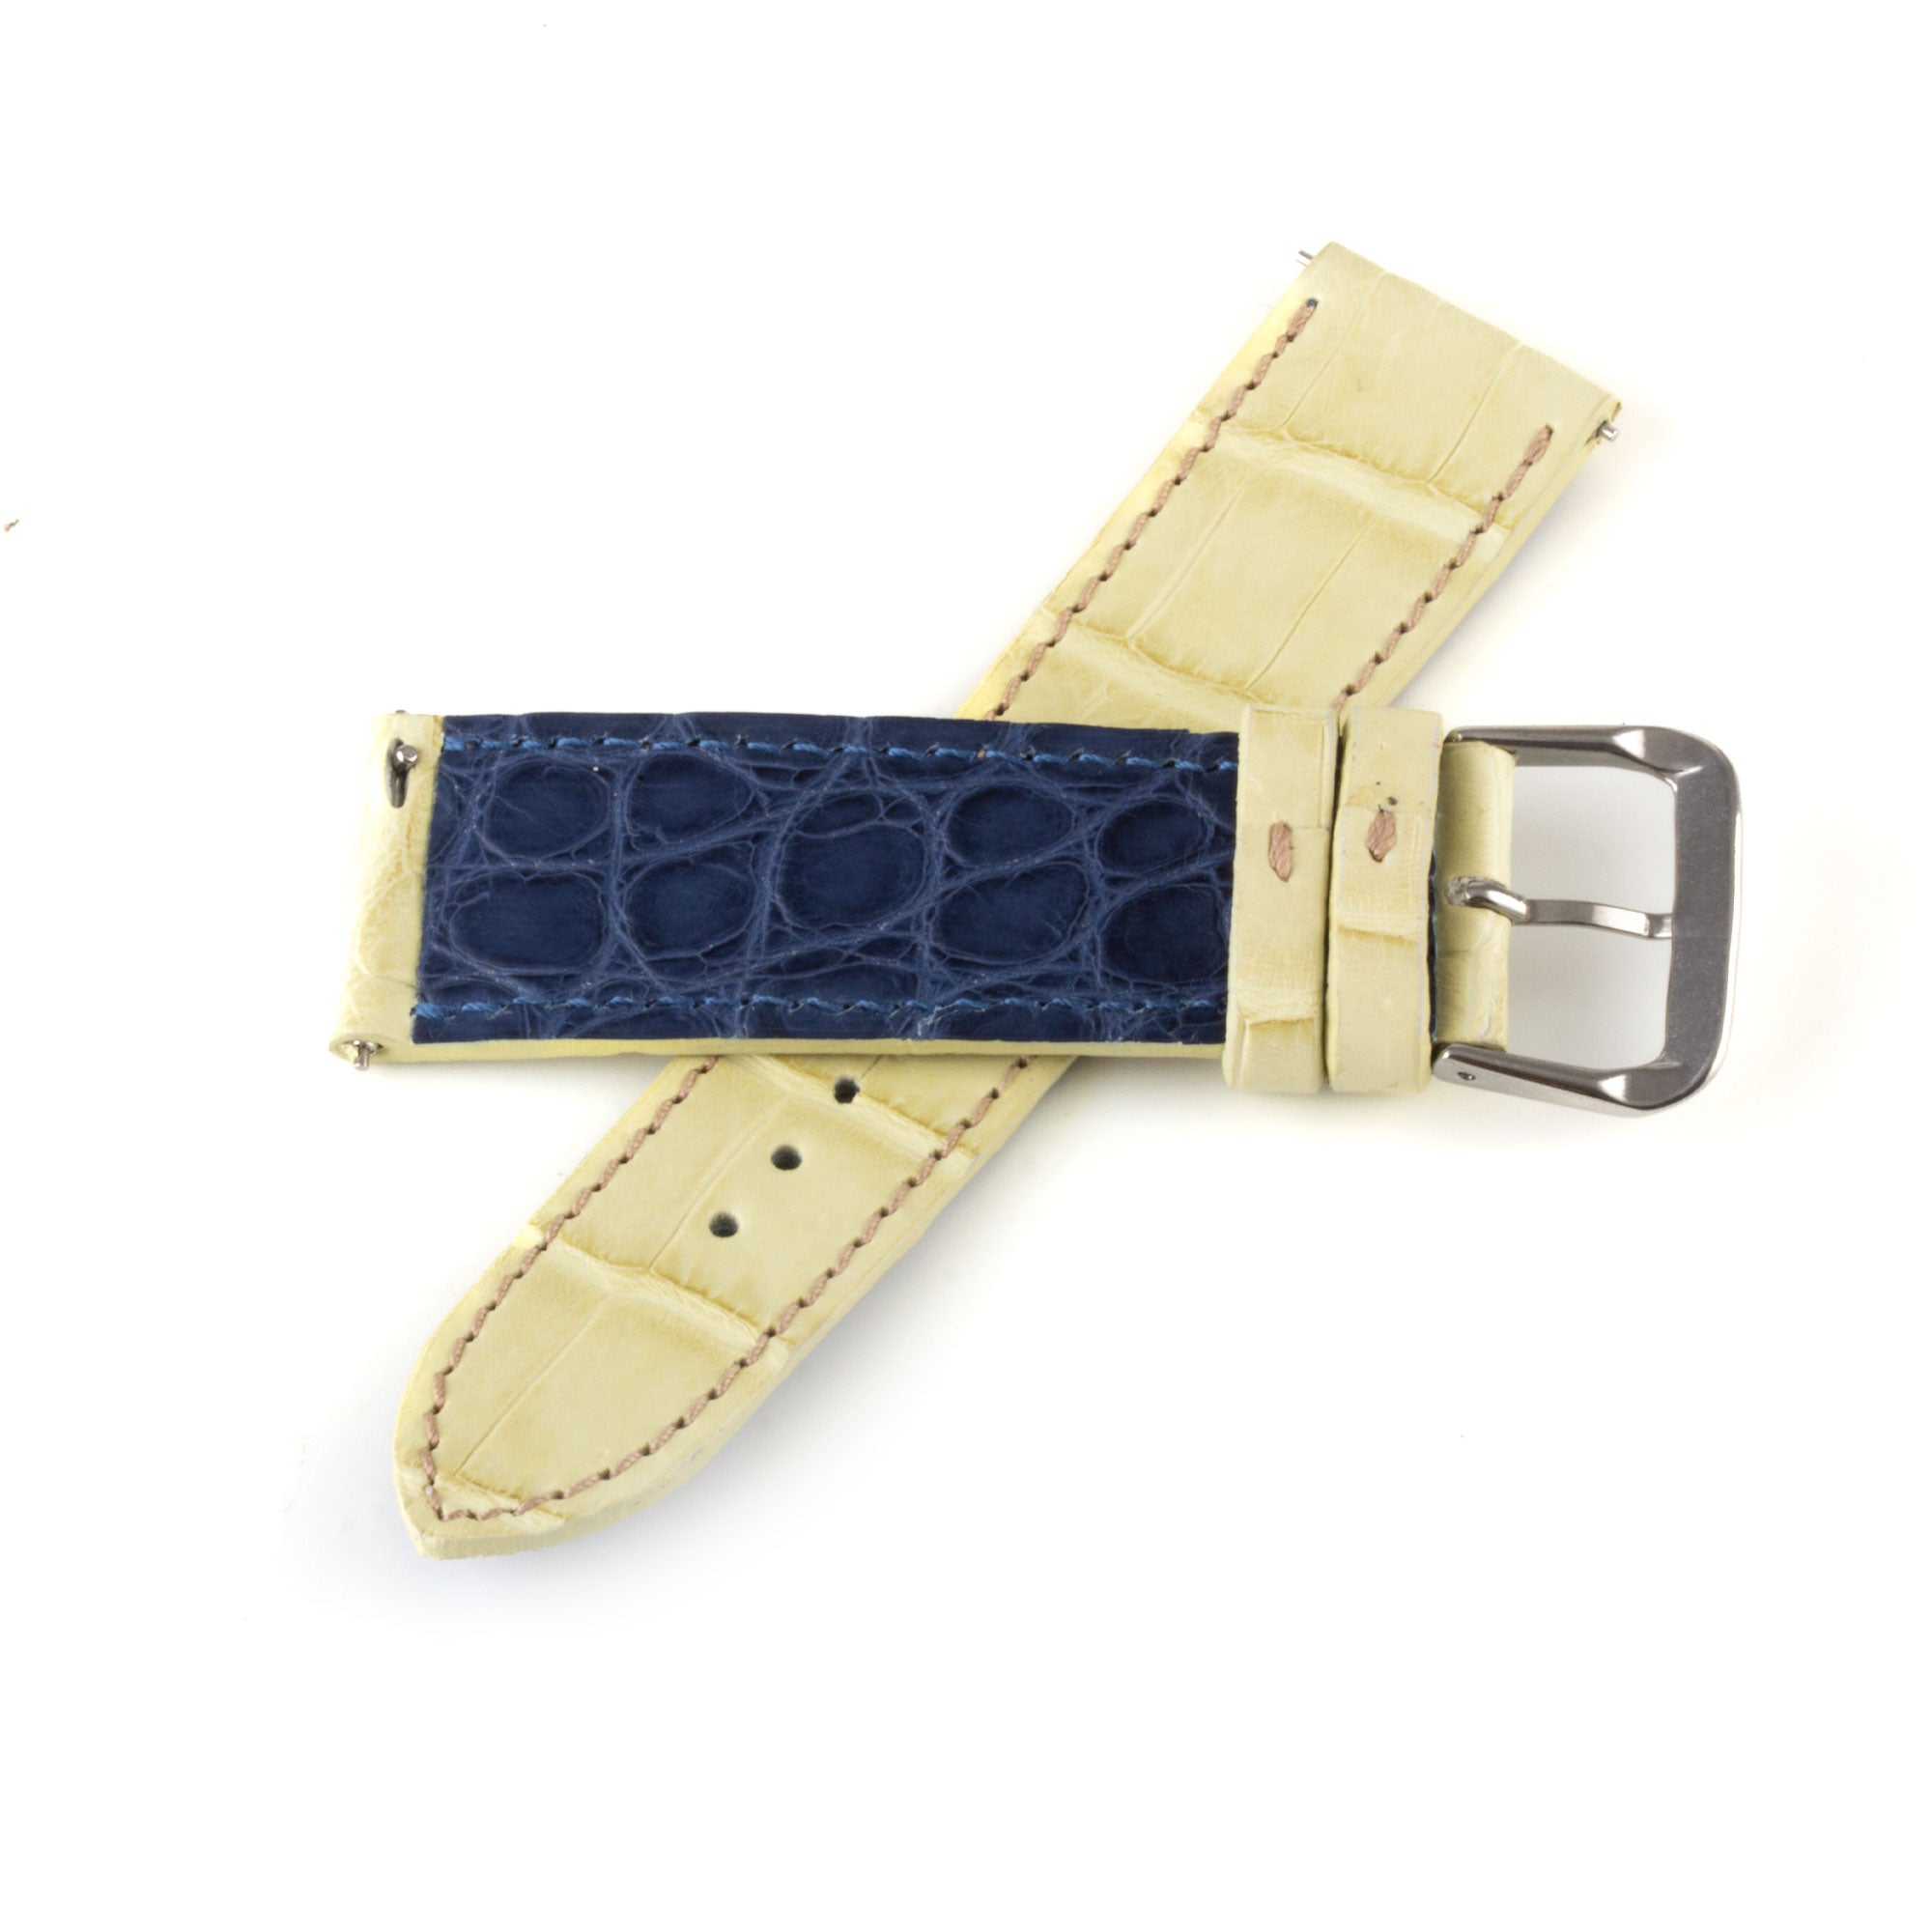 Alligator "Solo" leather watch band - 21mm width (0.83 inches) / Size M (n° 7)